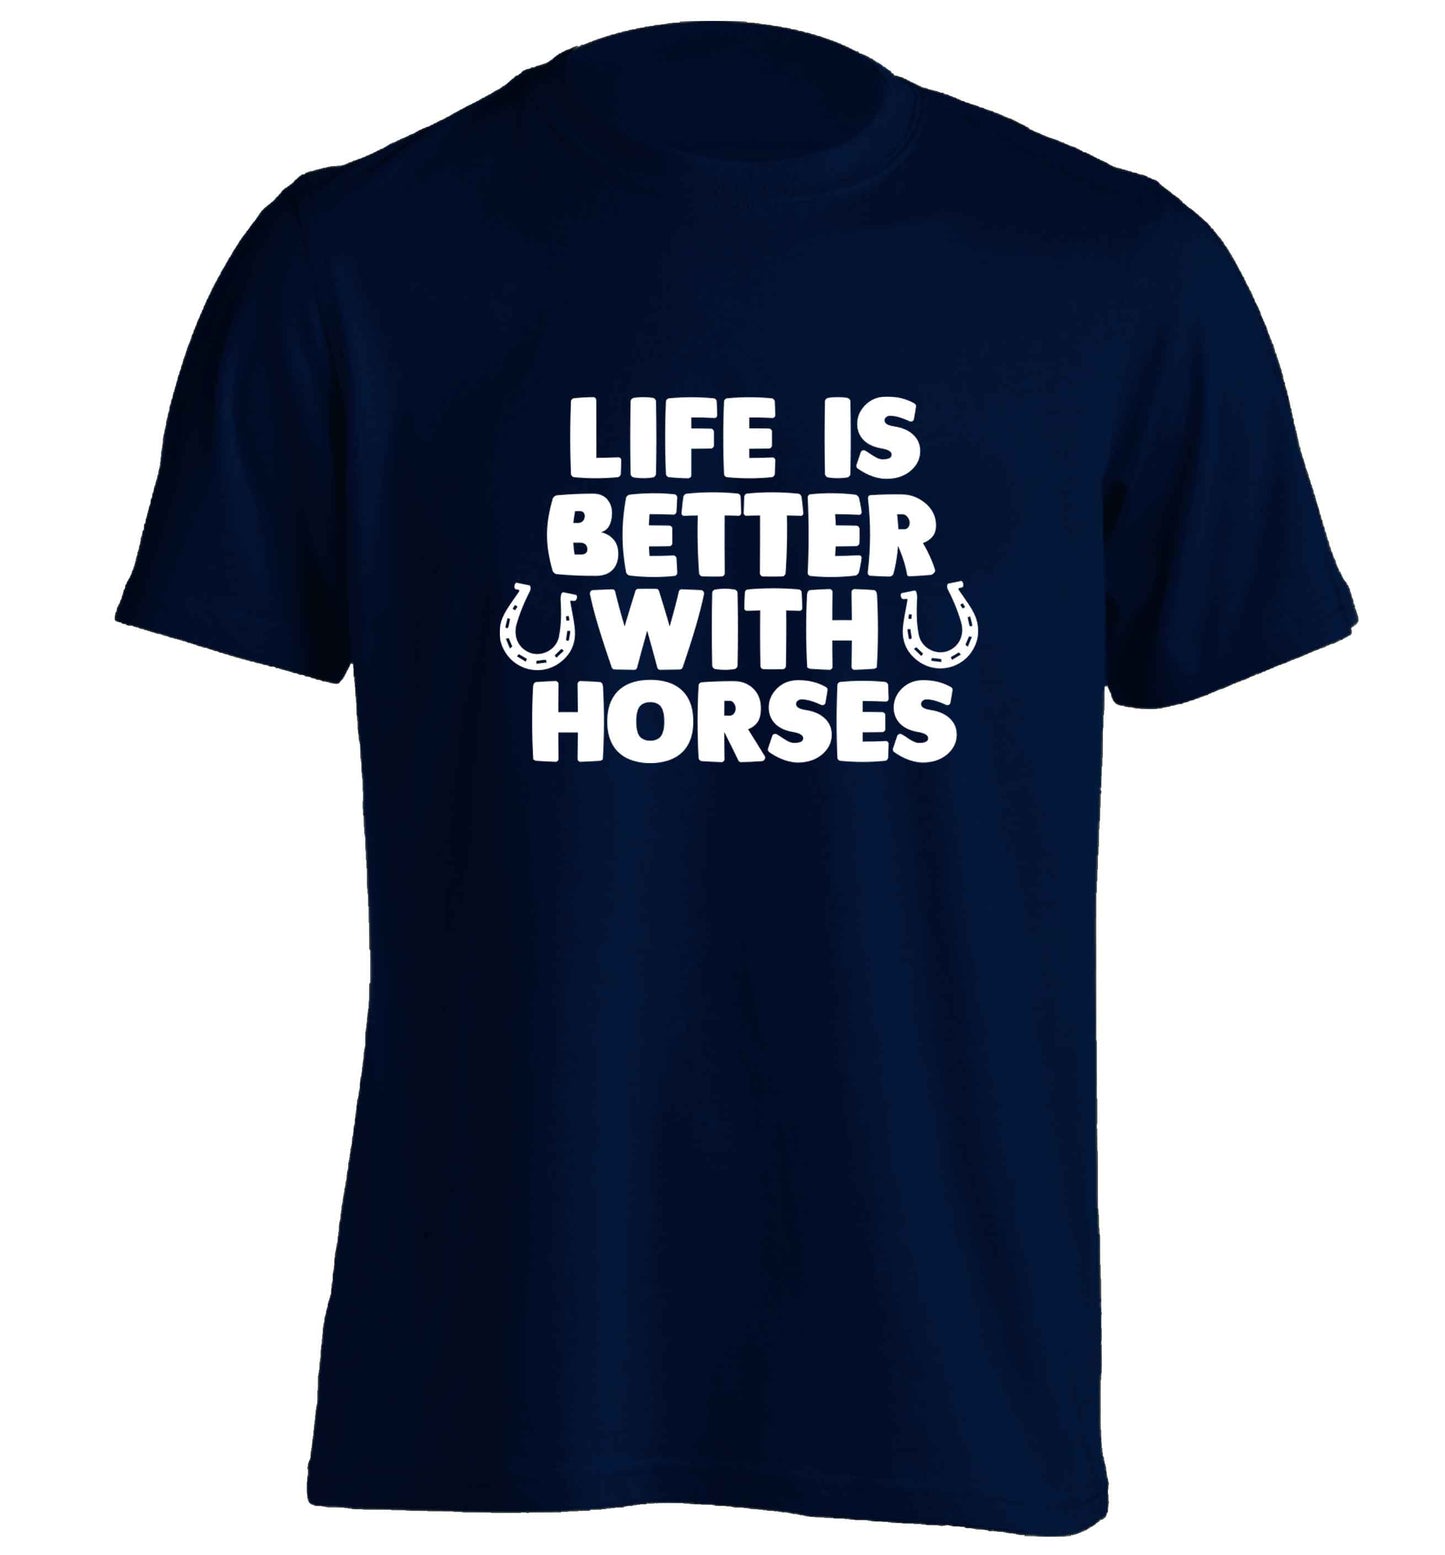 Life is better with horses adults unisex navy Tshirt 2XL